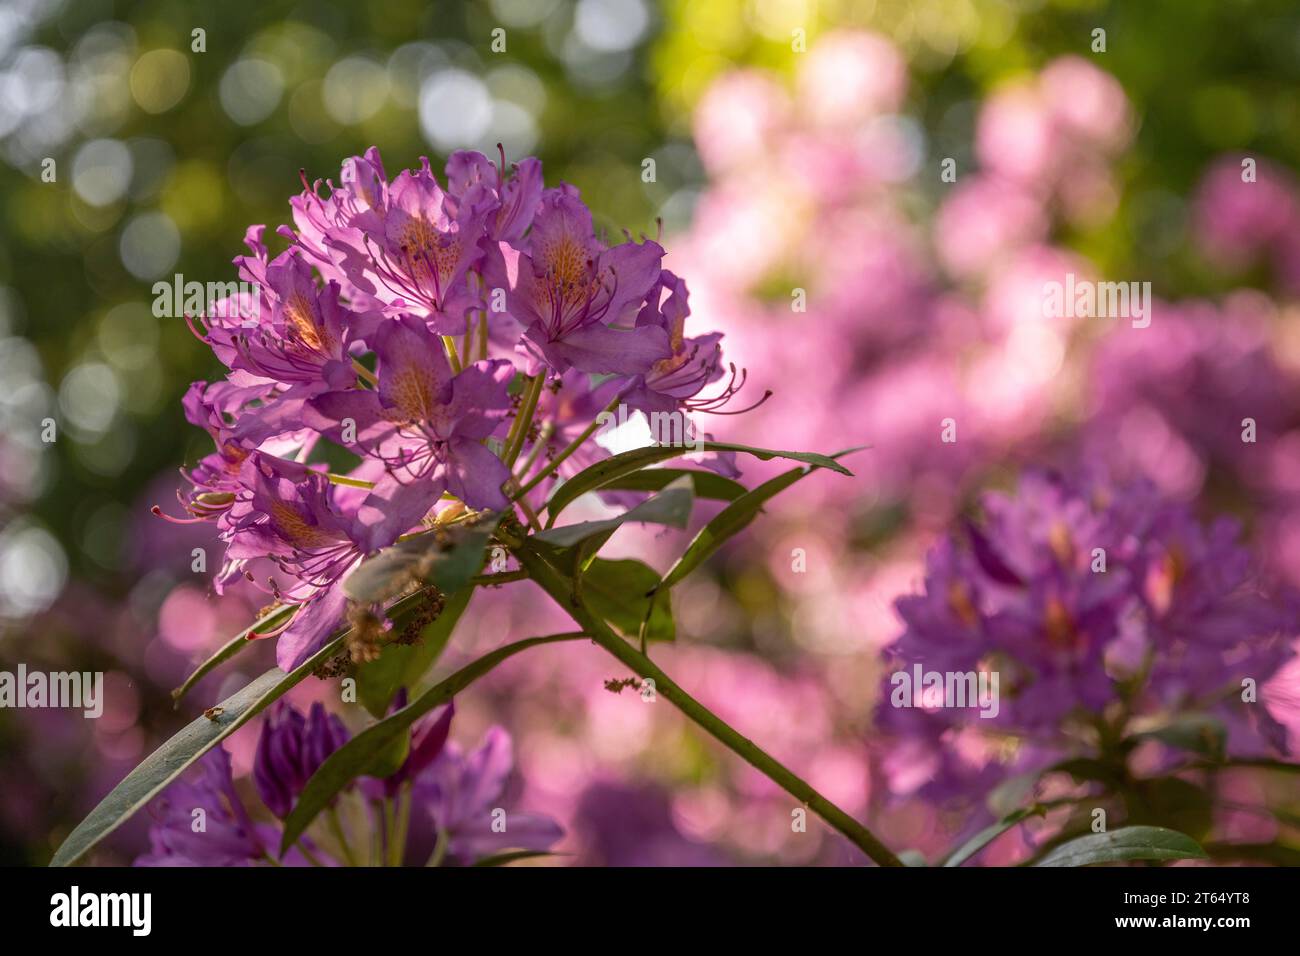 Rhododendron flowers (Rhododendron Homer), Royal Botanic Gardens, Kew, London, England, Great Britain Stock Photo